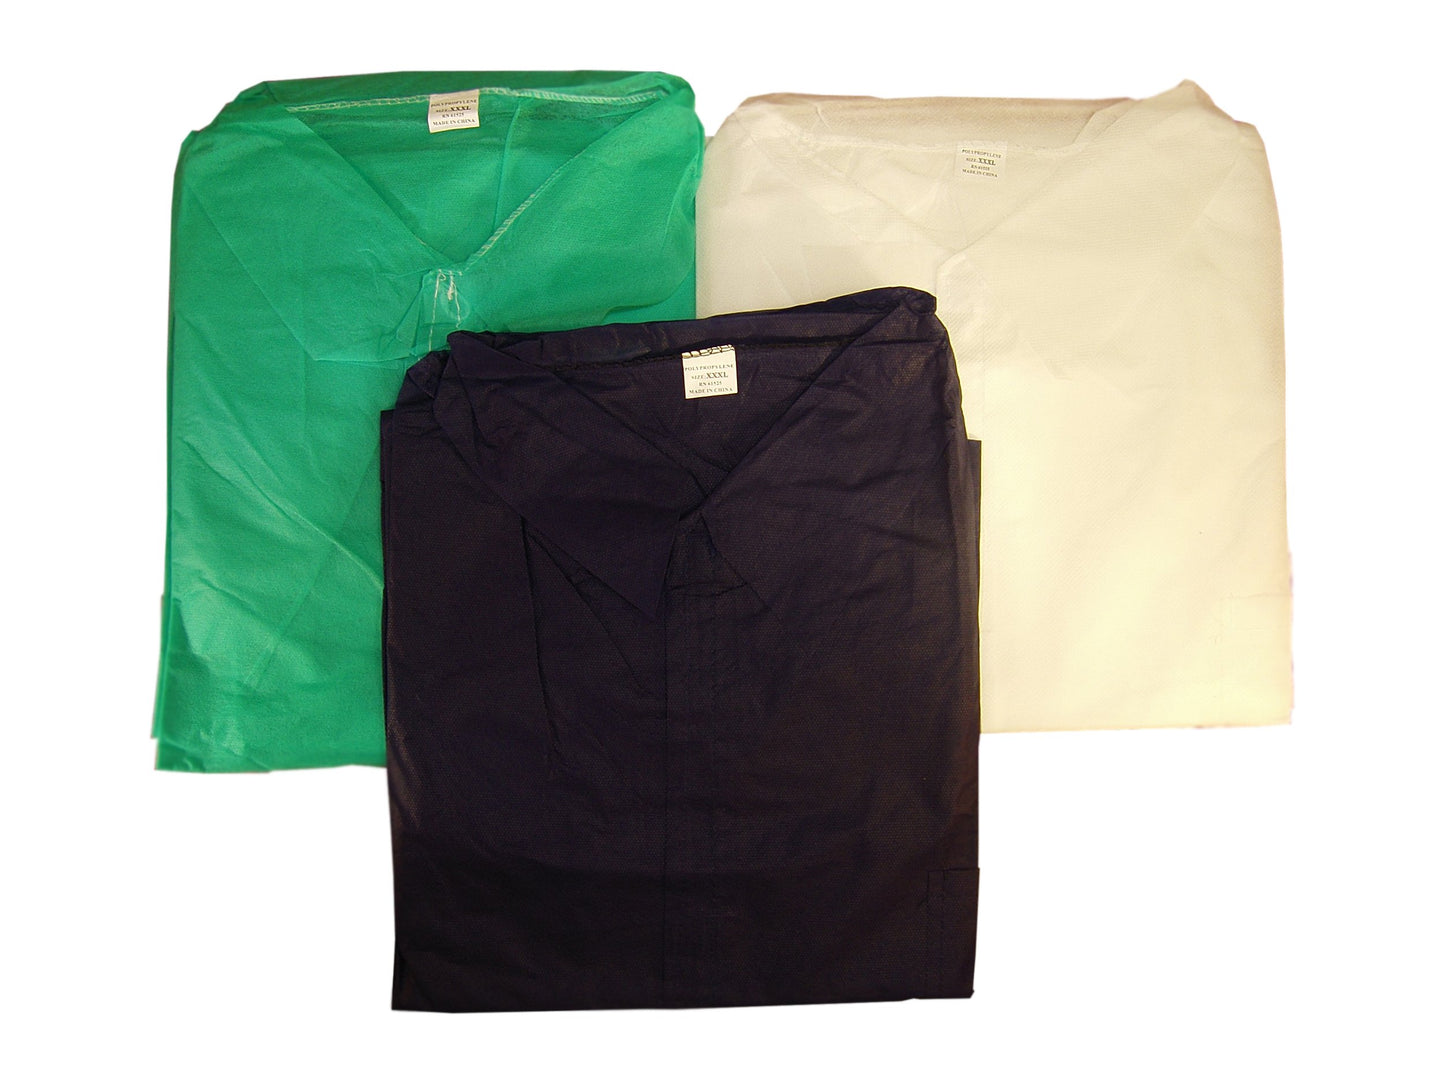 WHITE LAB COATS WITH 3 POCKETS (10 PIECES PER BAG, 3 BAGS PER CASE) - New England Safety Supply